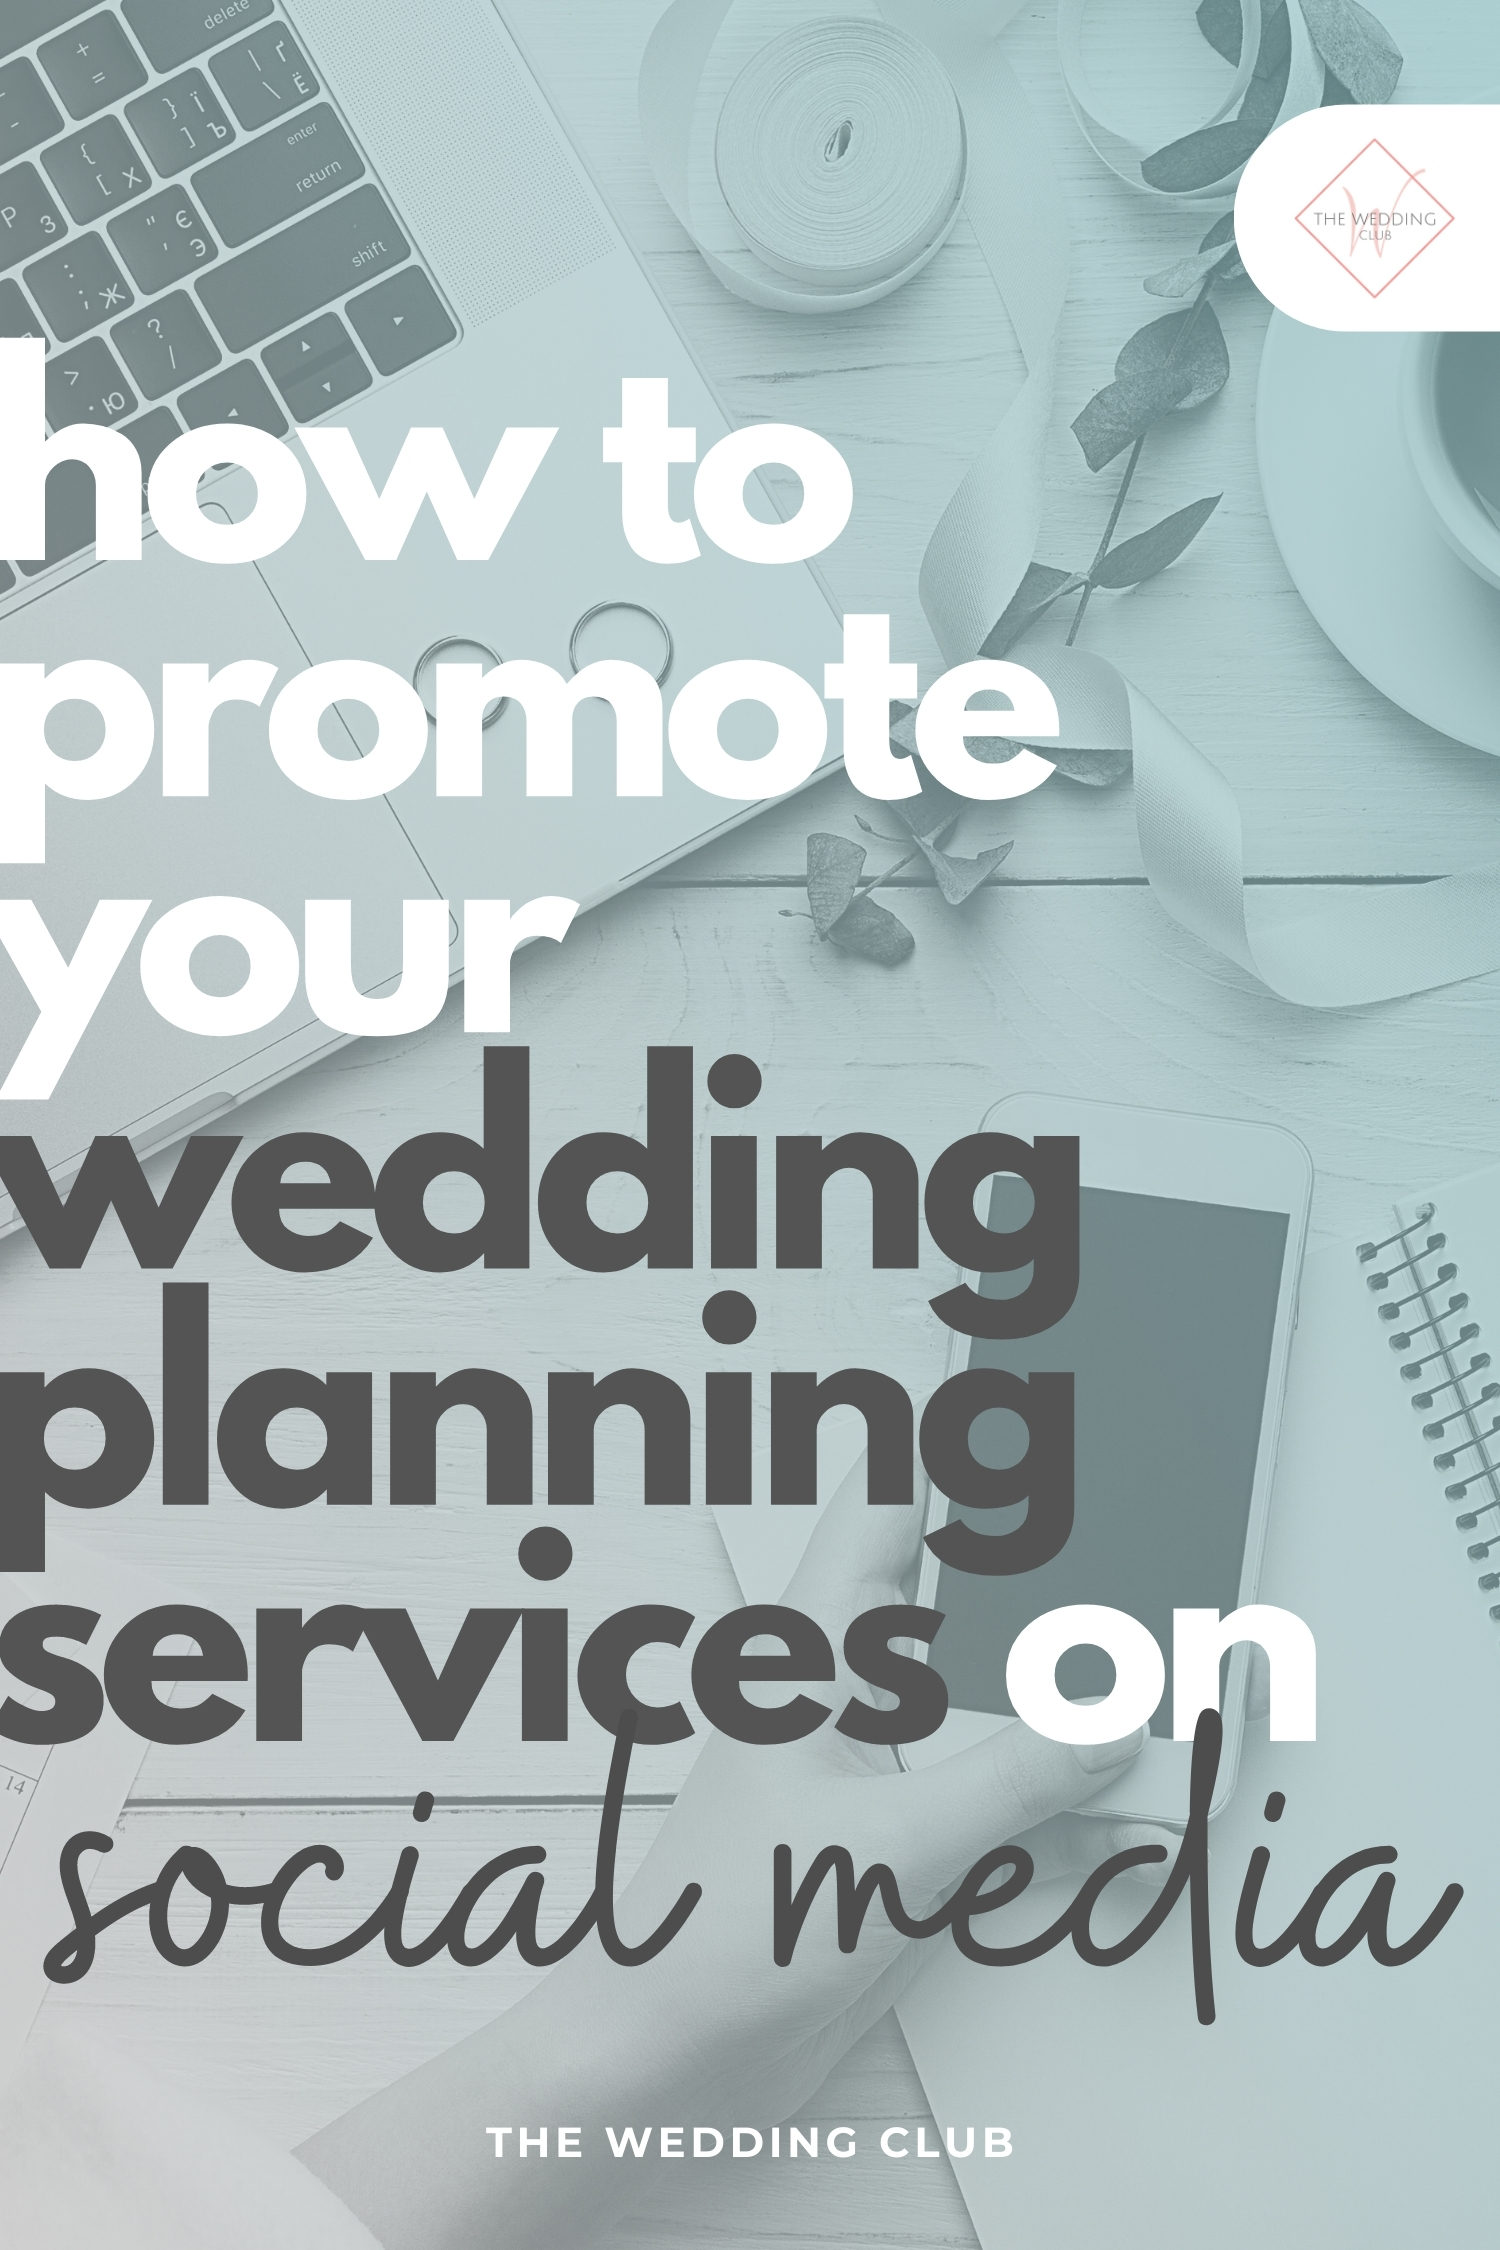 How to Promote your Wedding Planning Services on Social Media